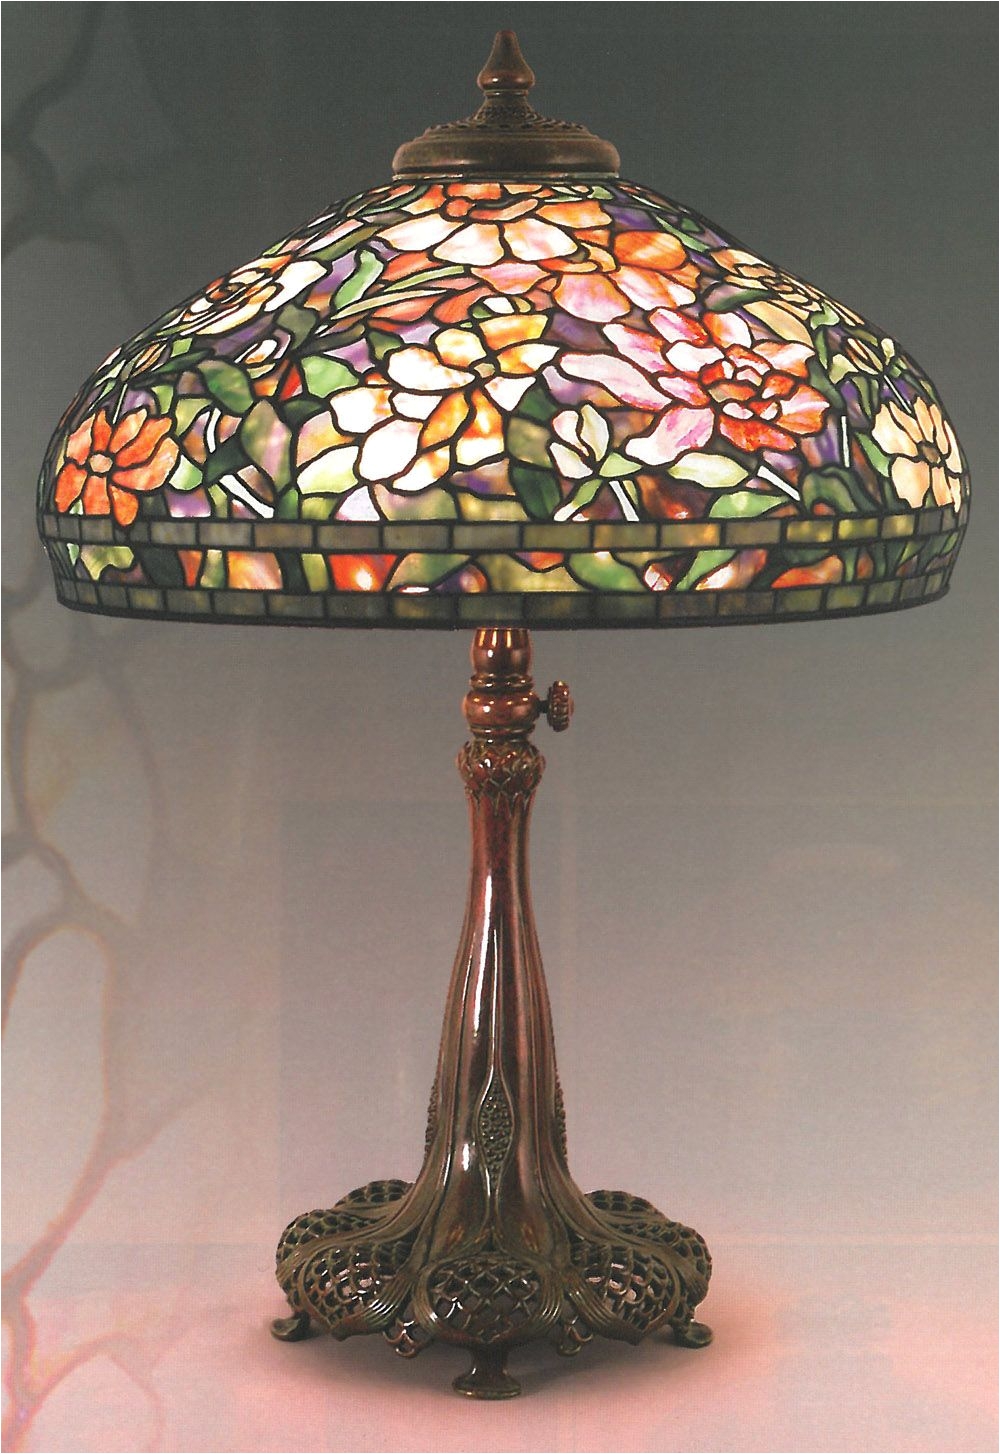 authentic tiffany lamp in the peony pattern on a very nice adjustable height base